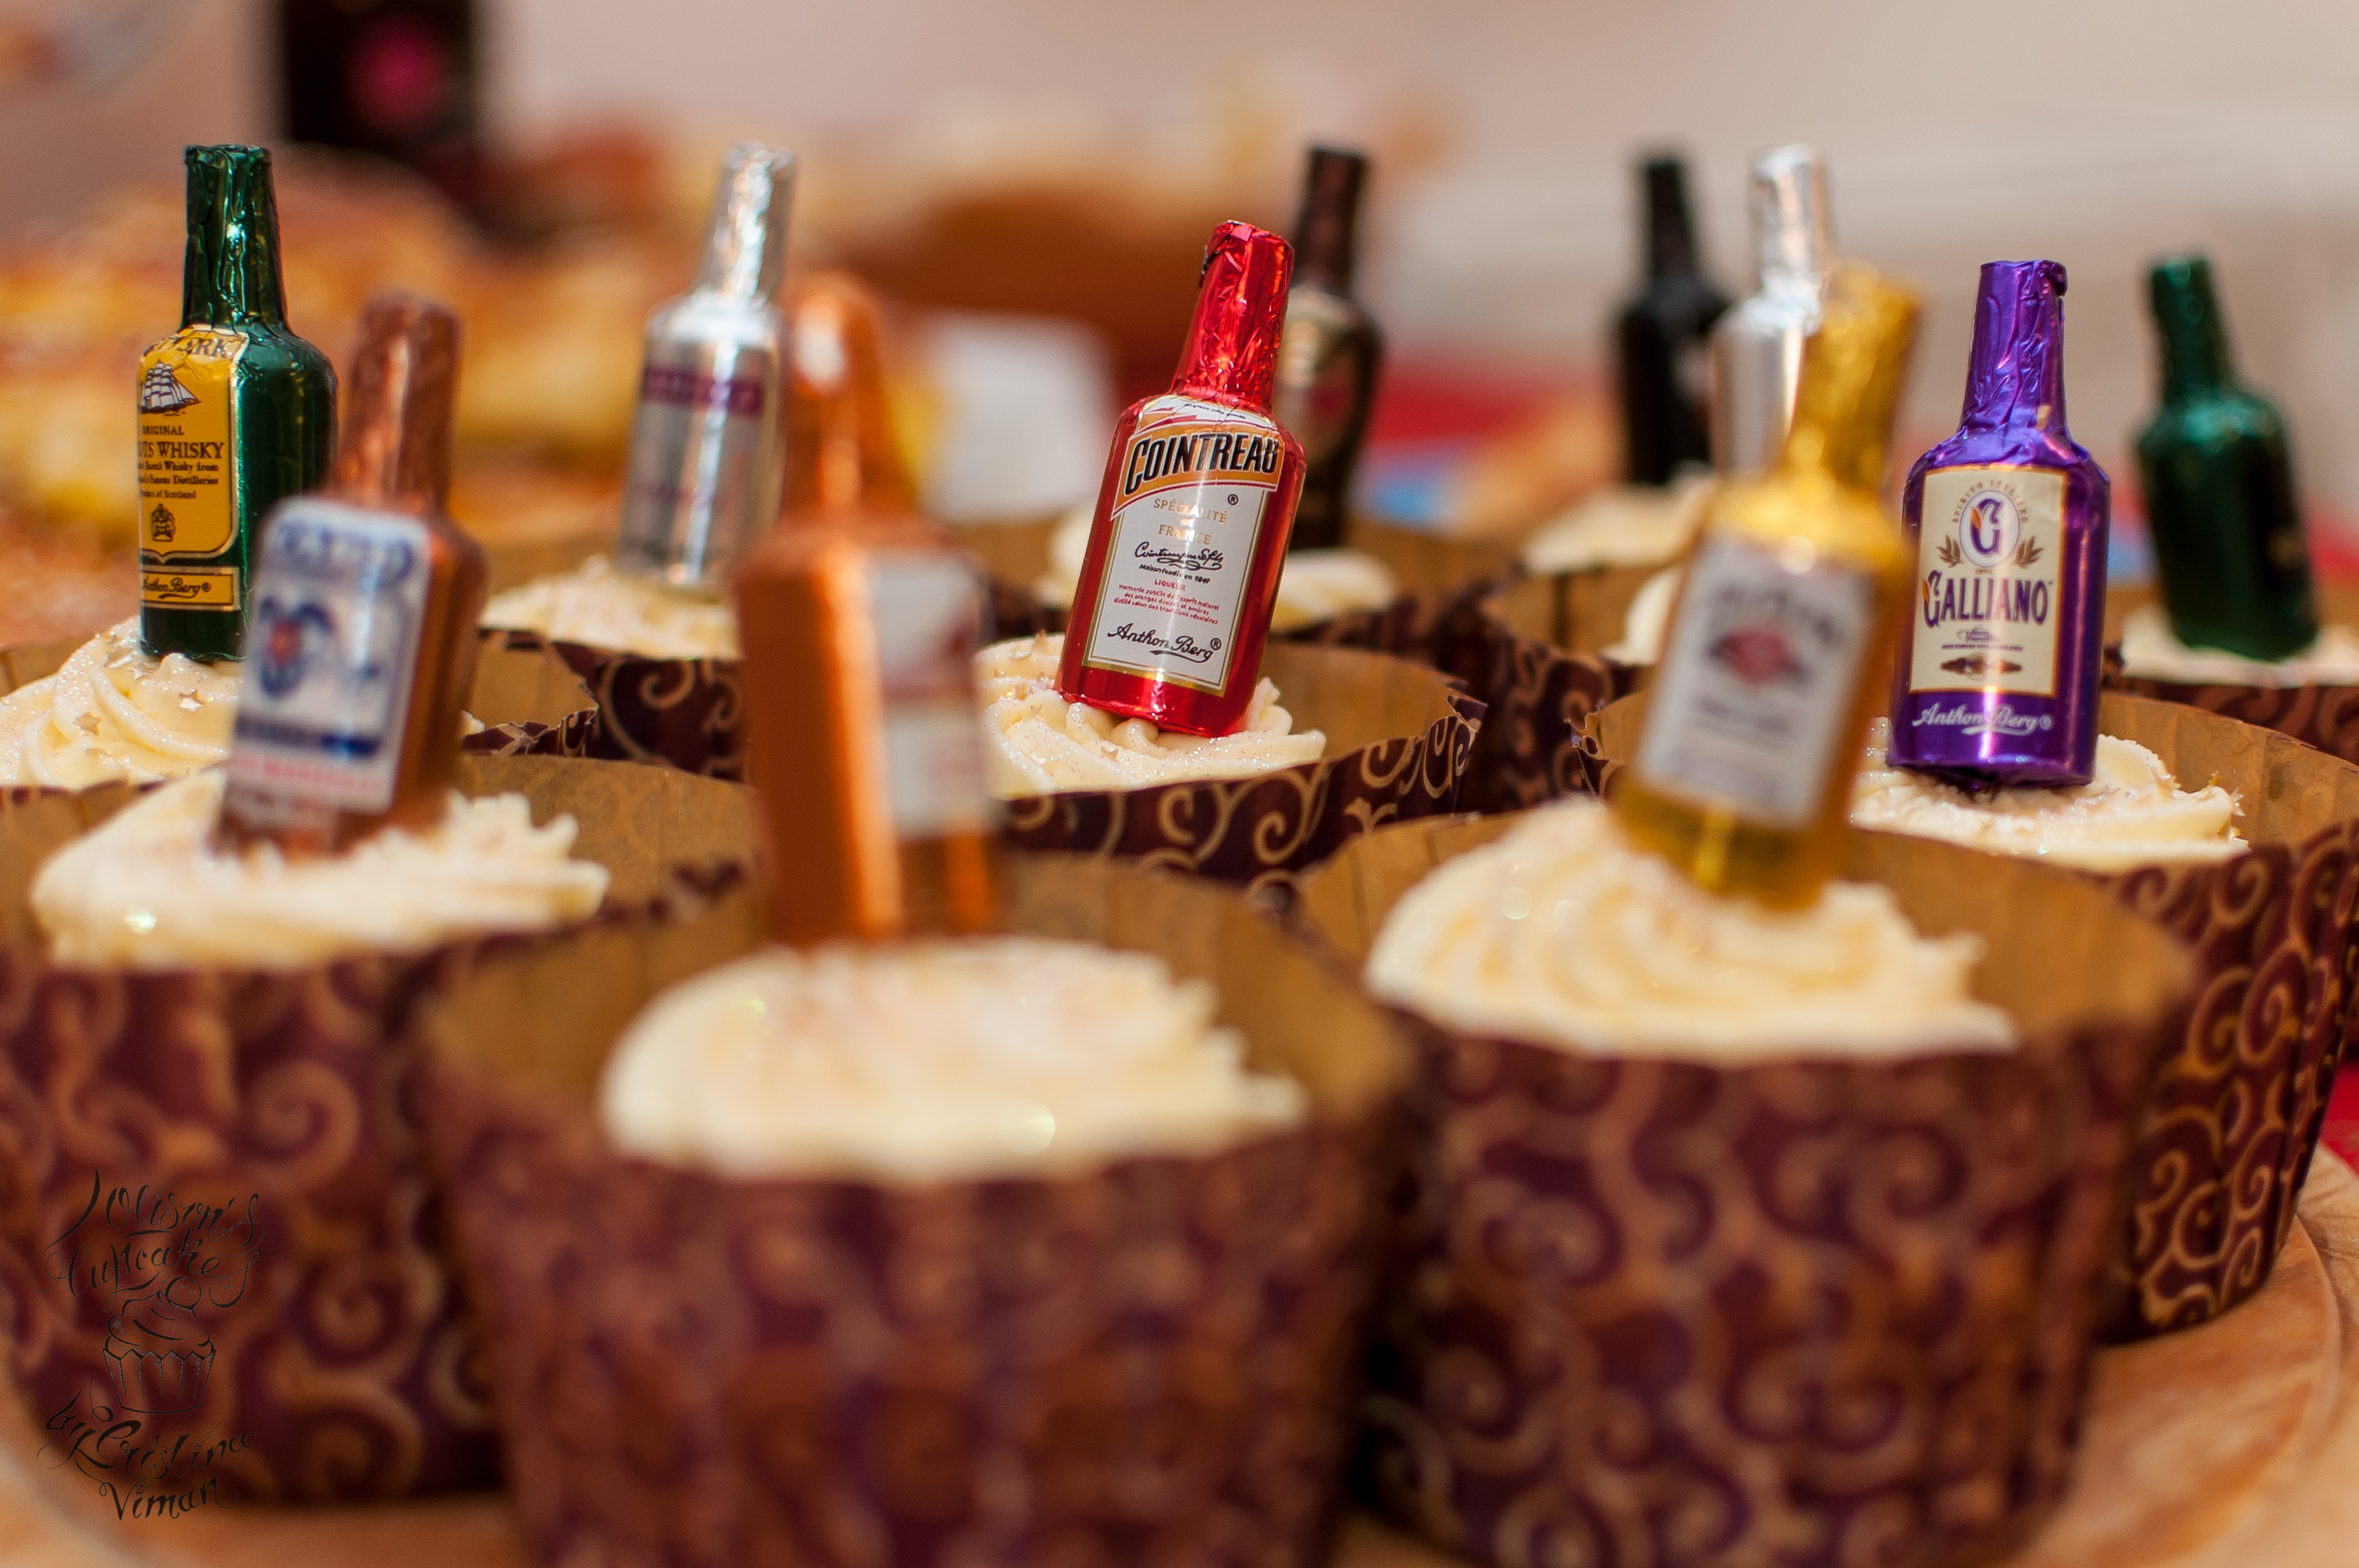 Chocolate Cupcakes with Alcohol